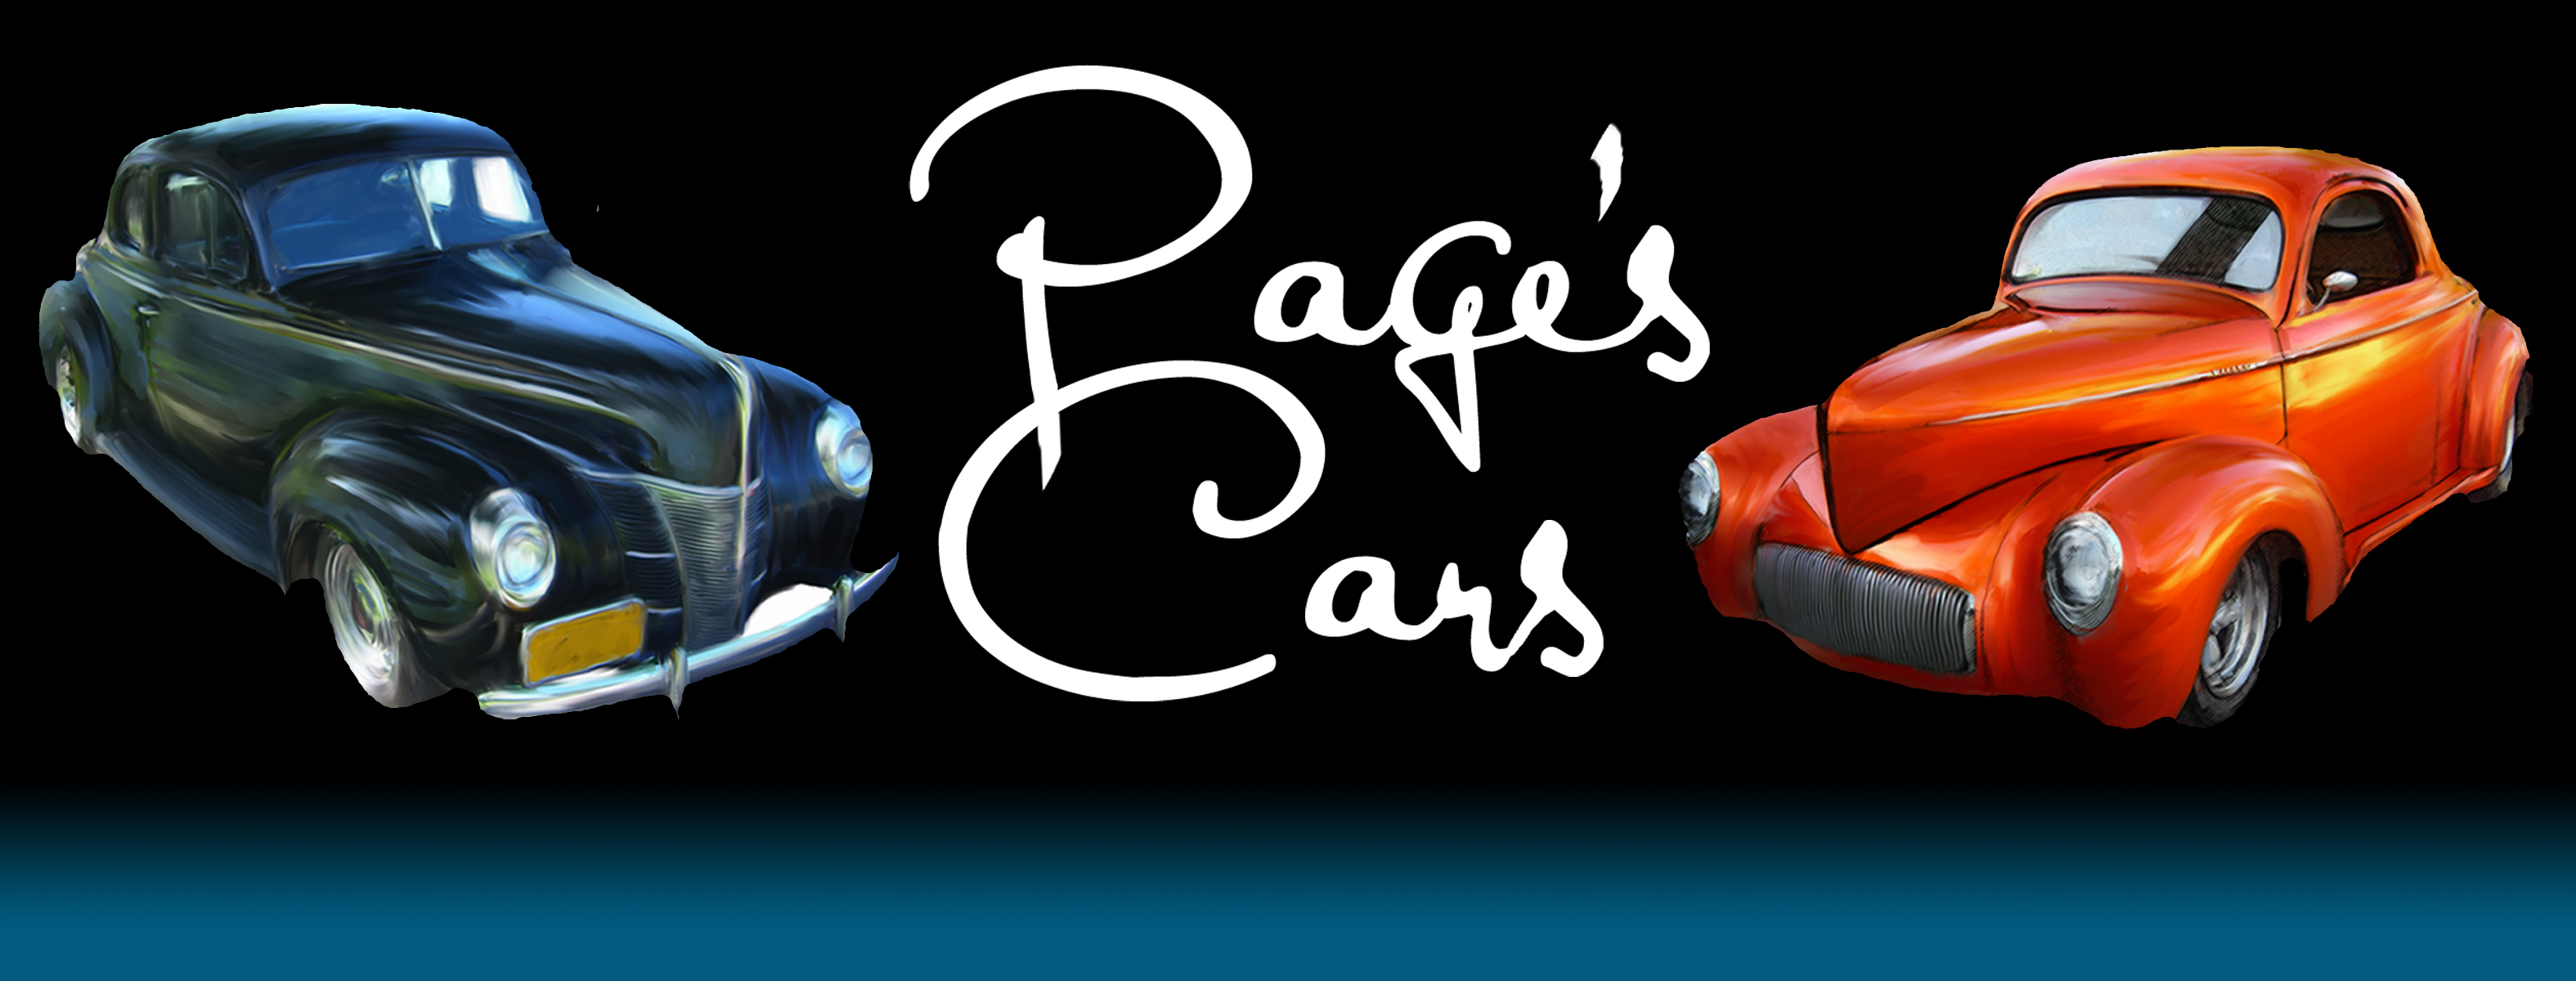 Page's Cars